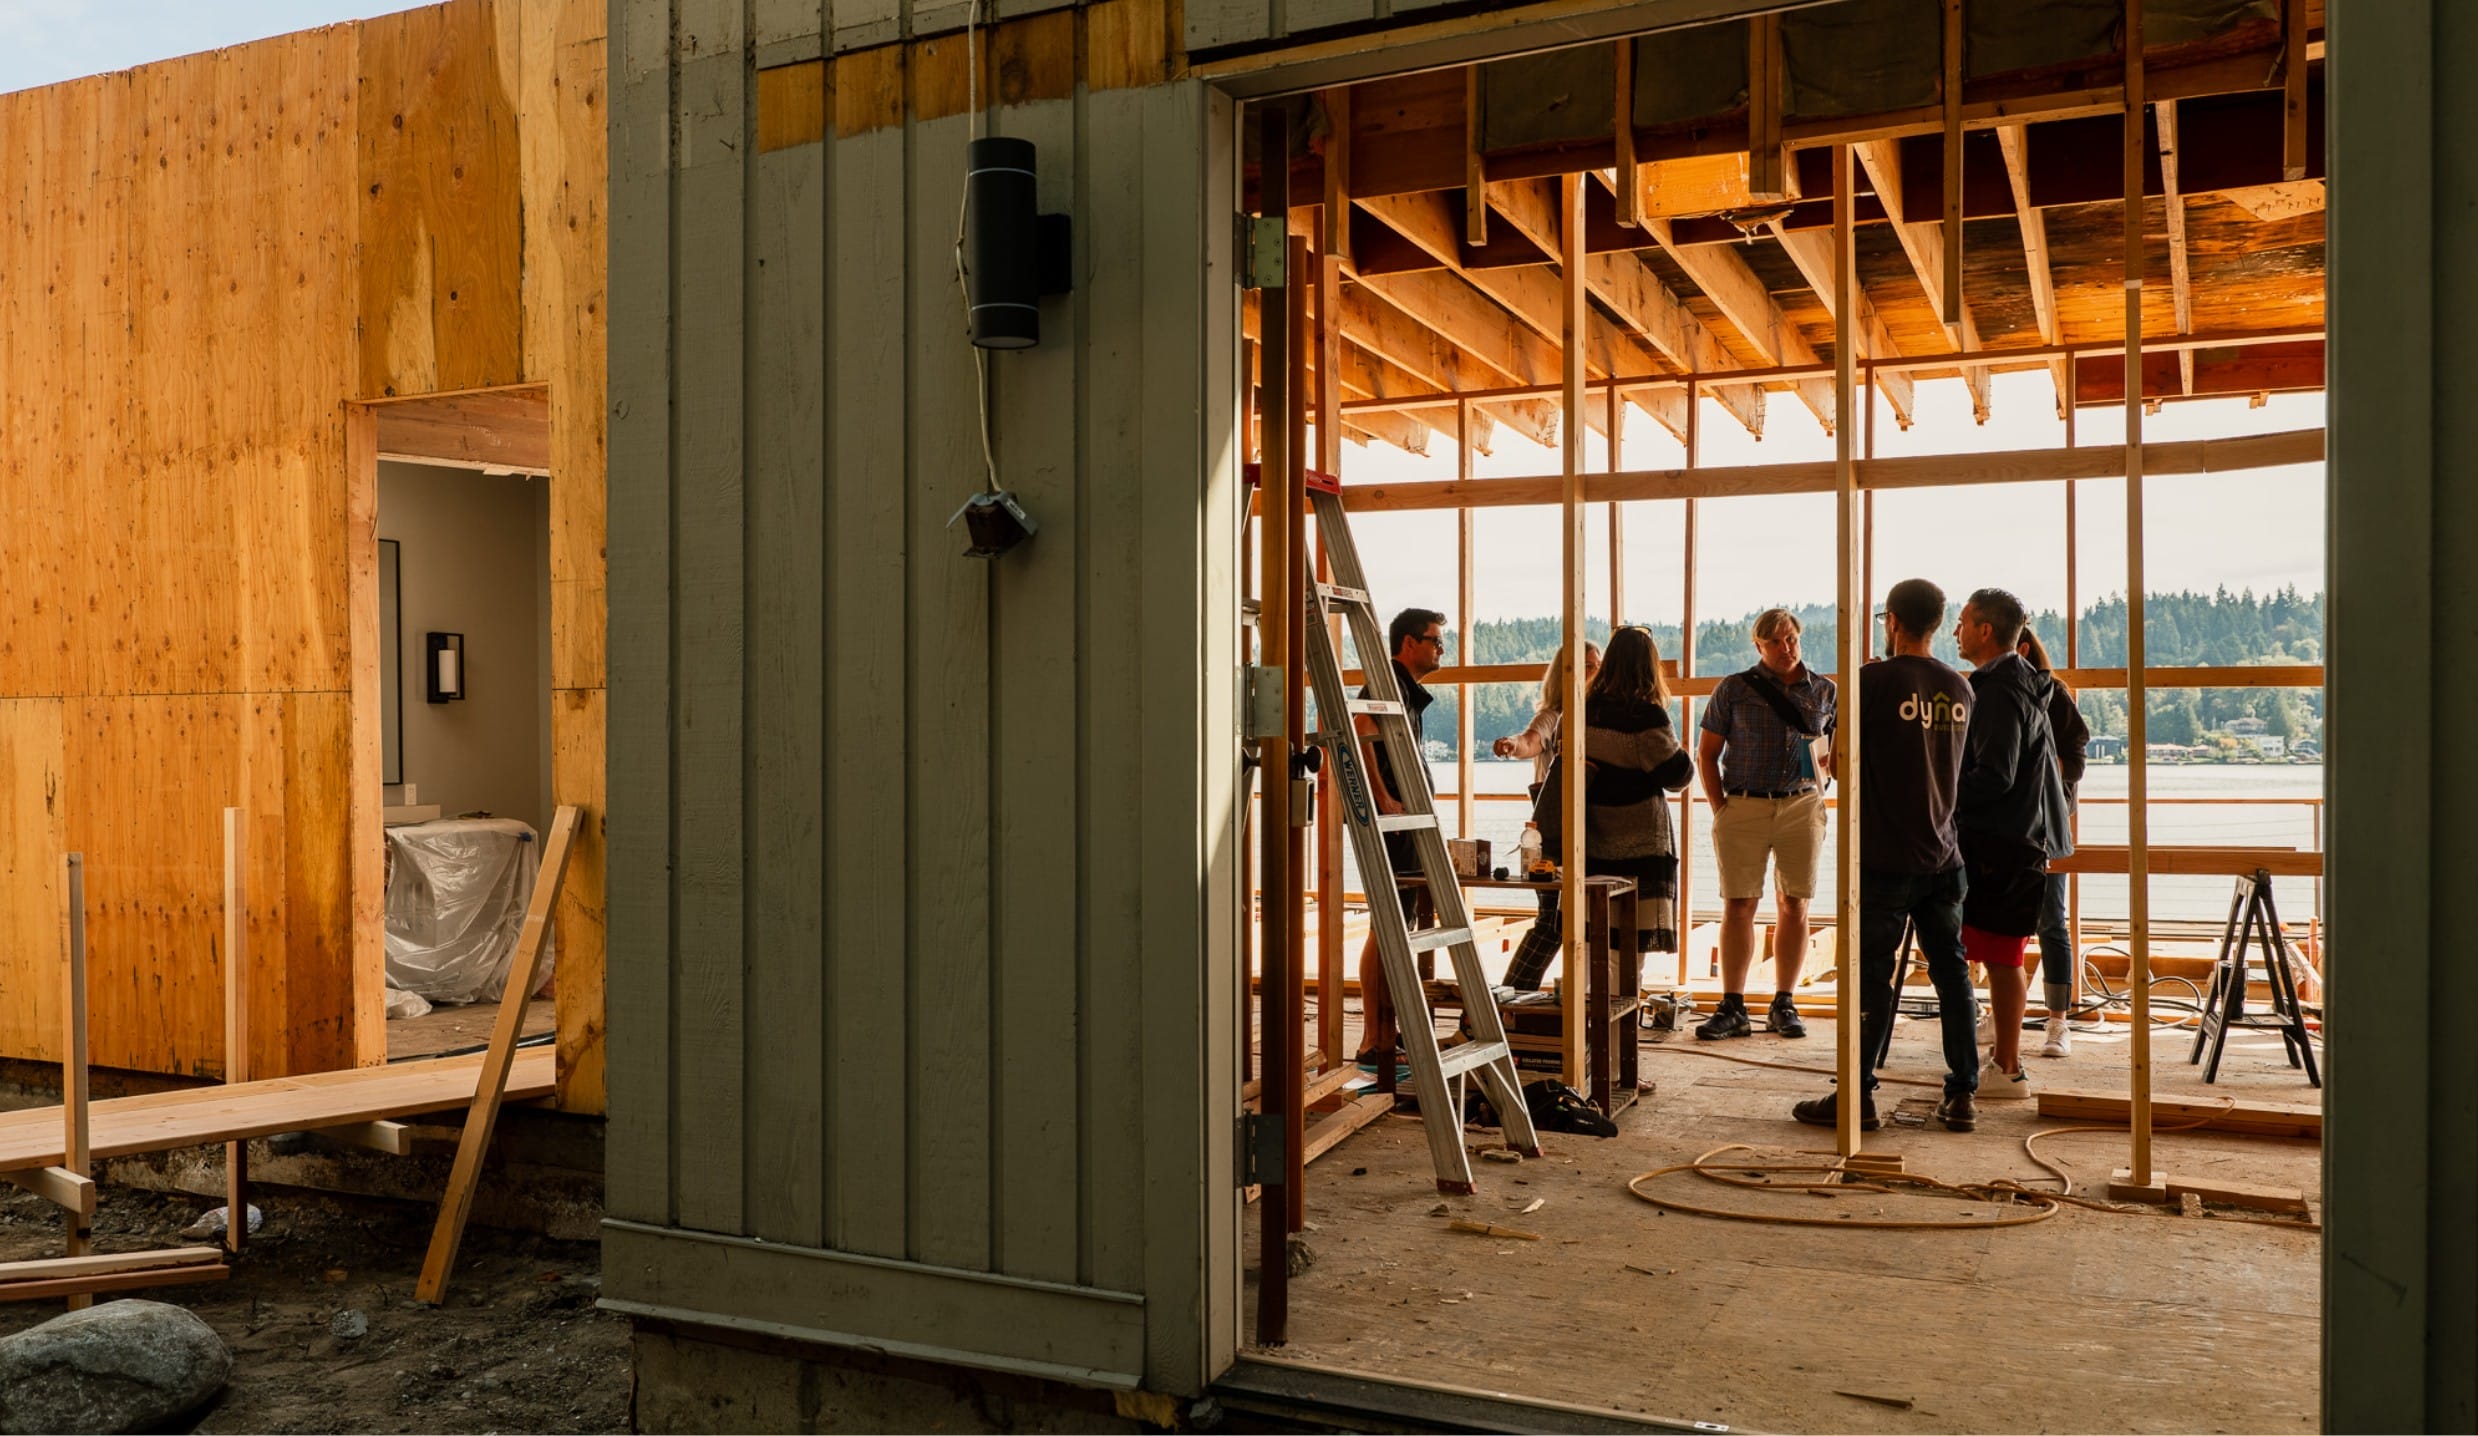 A group of people standing in the doorway of a house under construction, built by Dyna Builders, a Seattle based custom home builder.